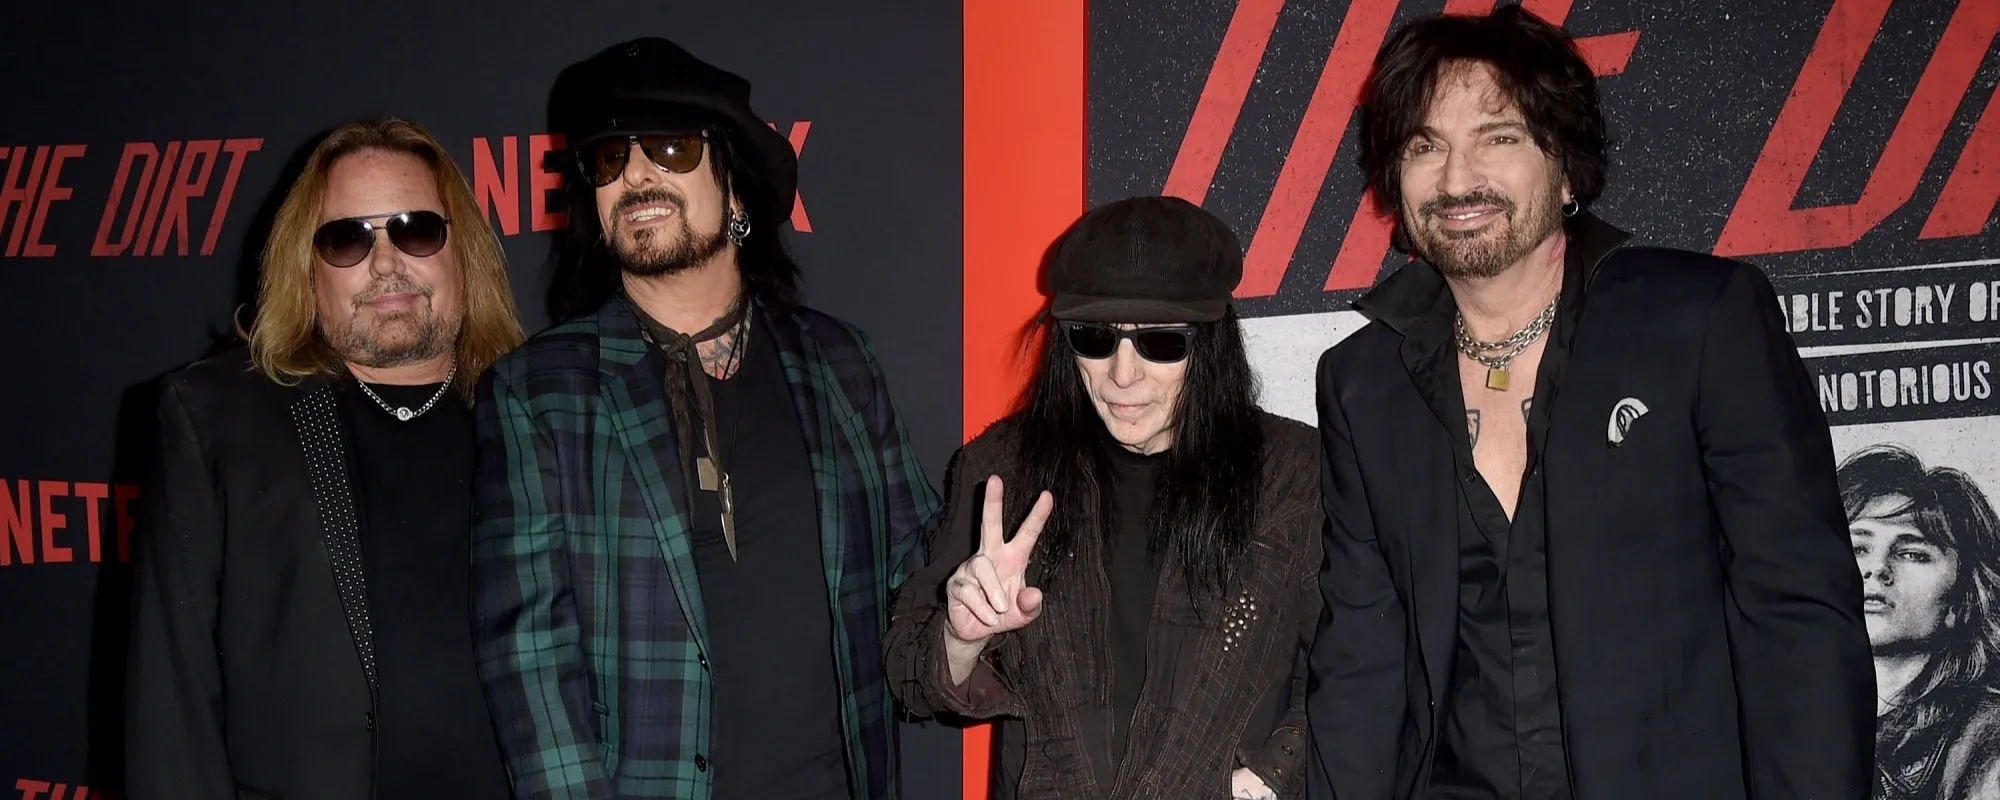 Mick Mars Wins Legal Battle in Ongoing Feud with Mötley Crüe: “They Can’t Bully Mick Anymore”